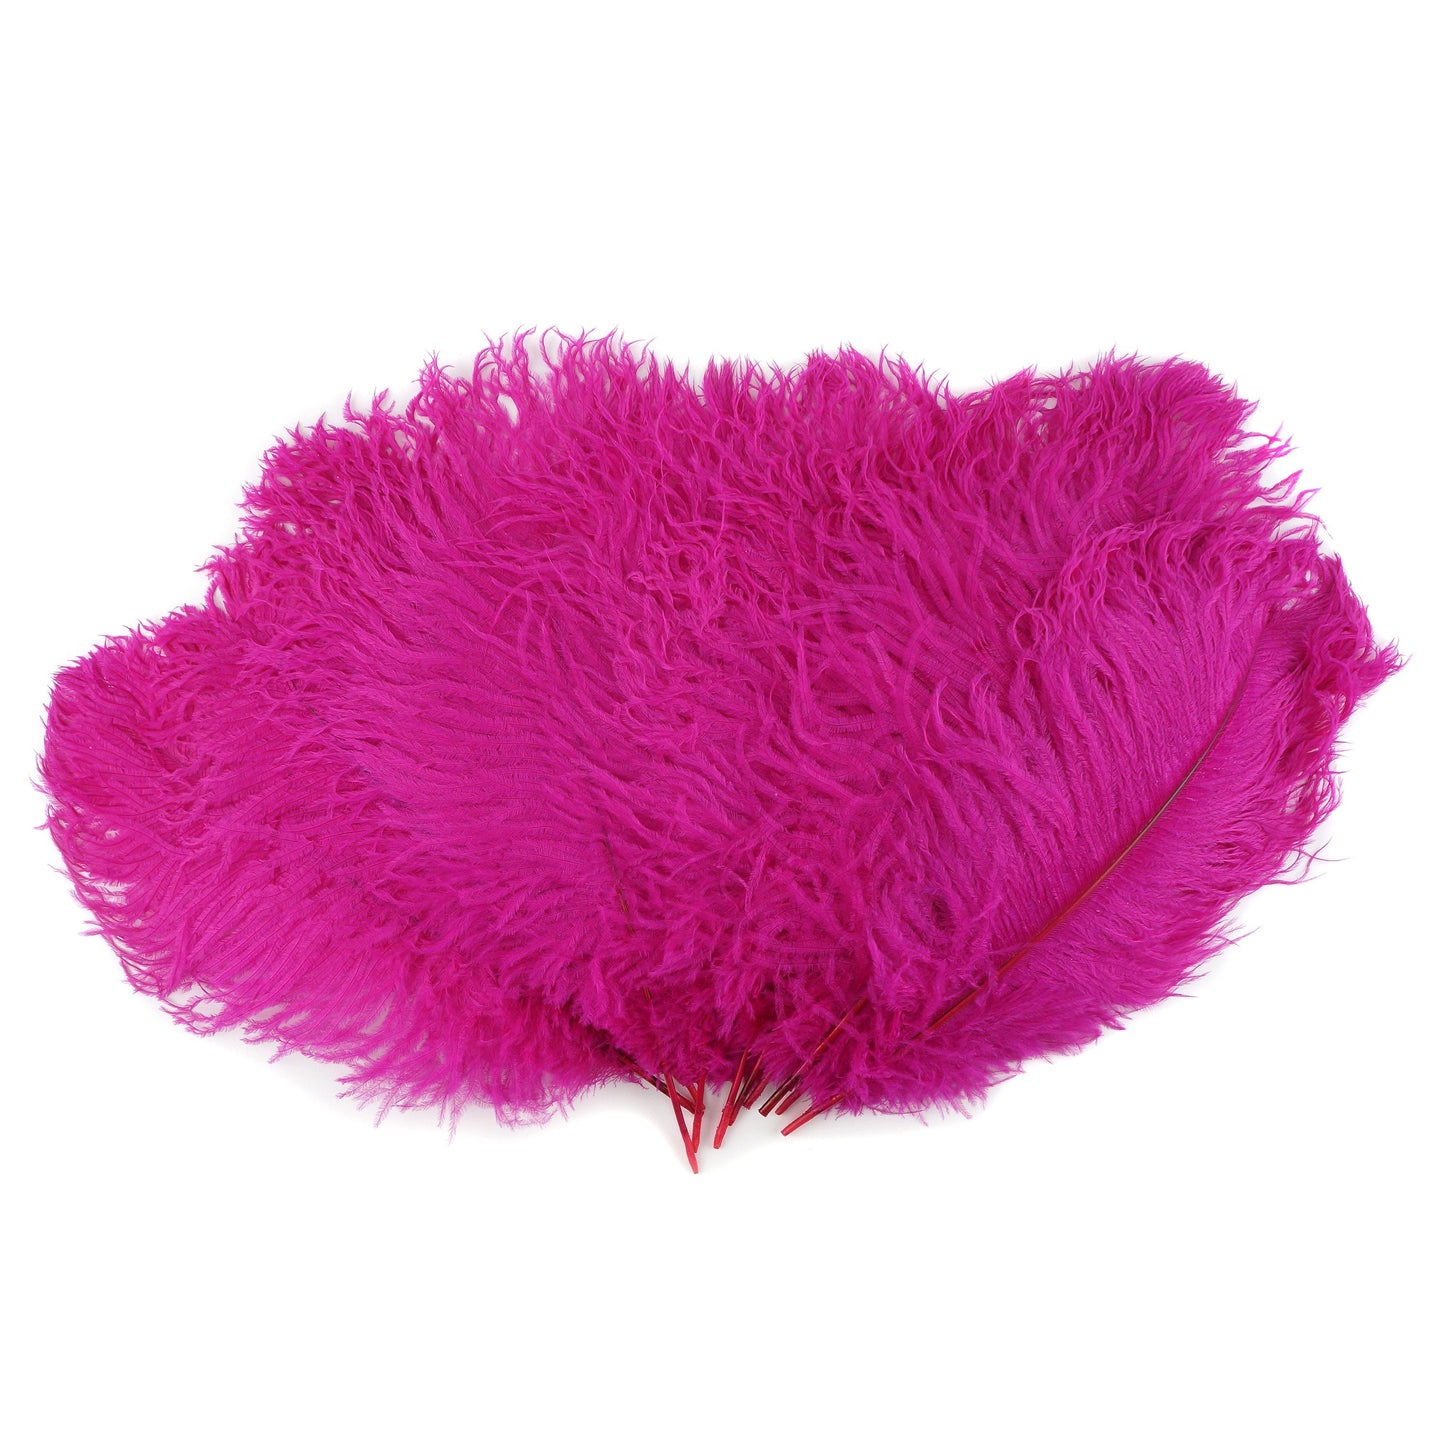 Ostrich Feathers 13-16" Drabs - Shocking Pink